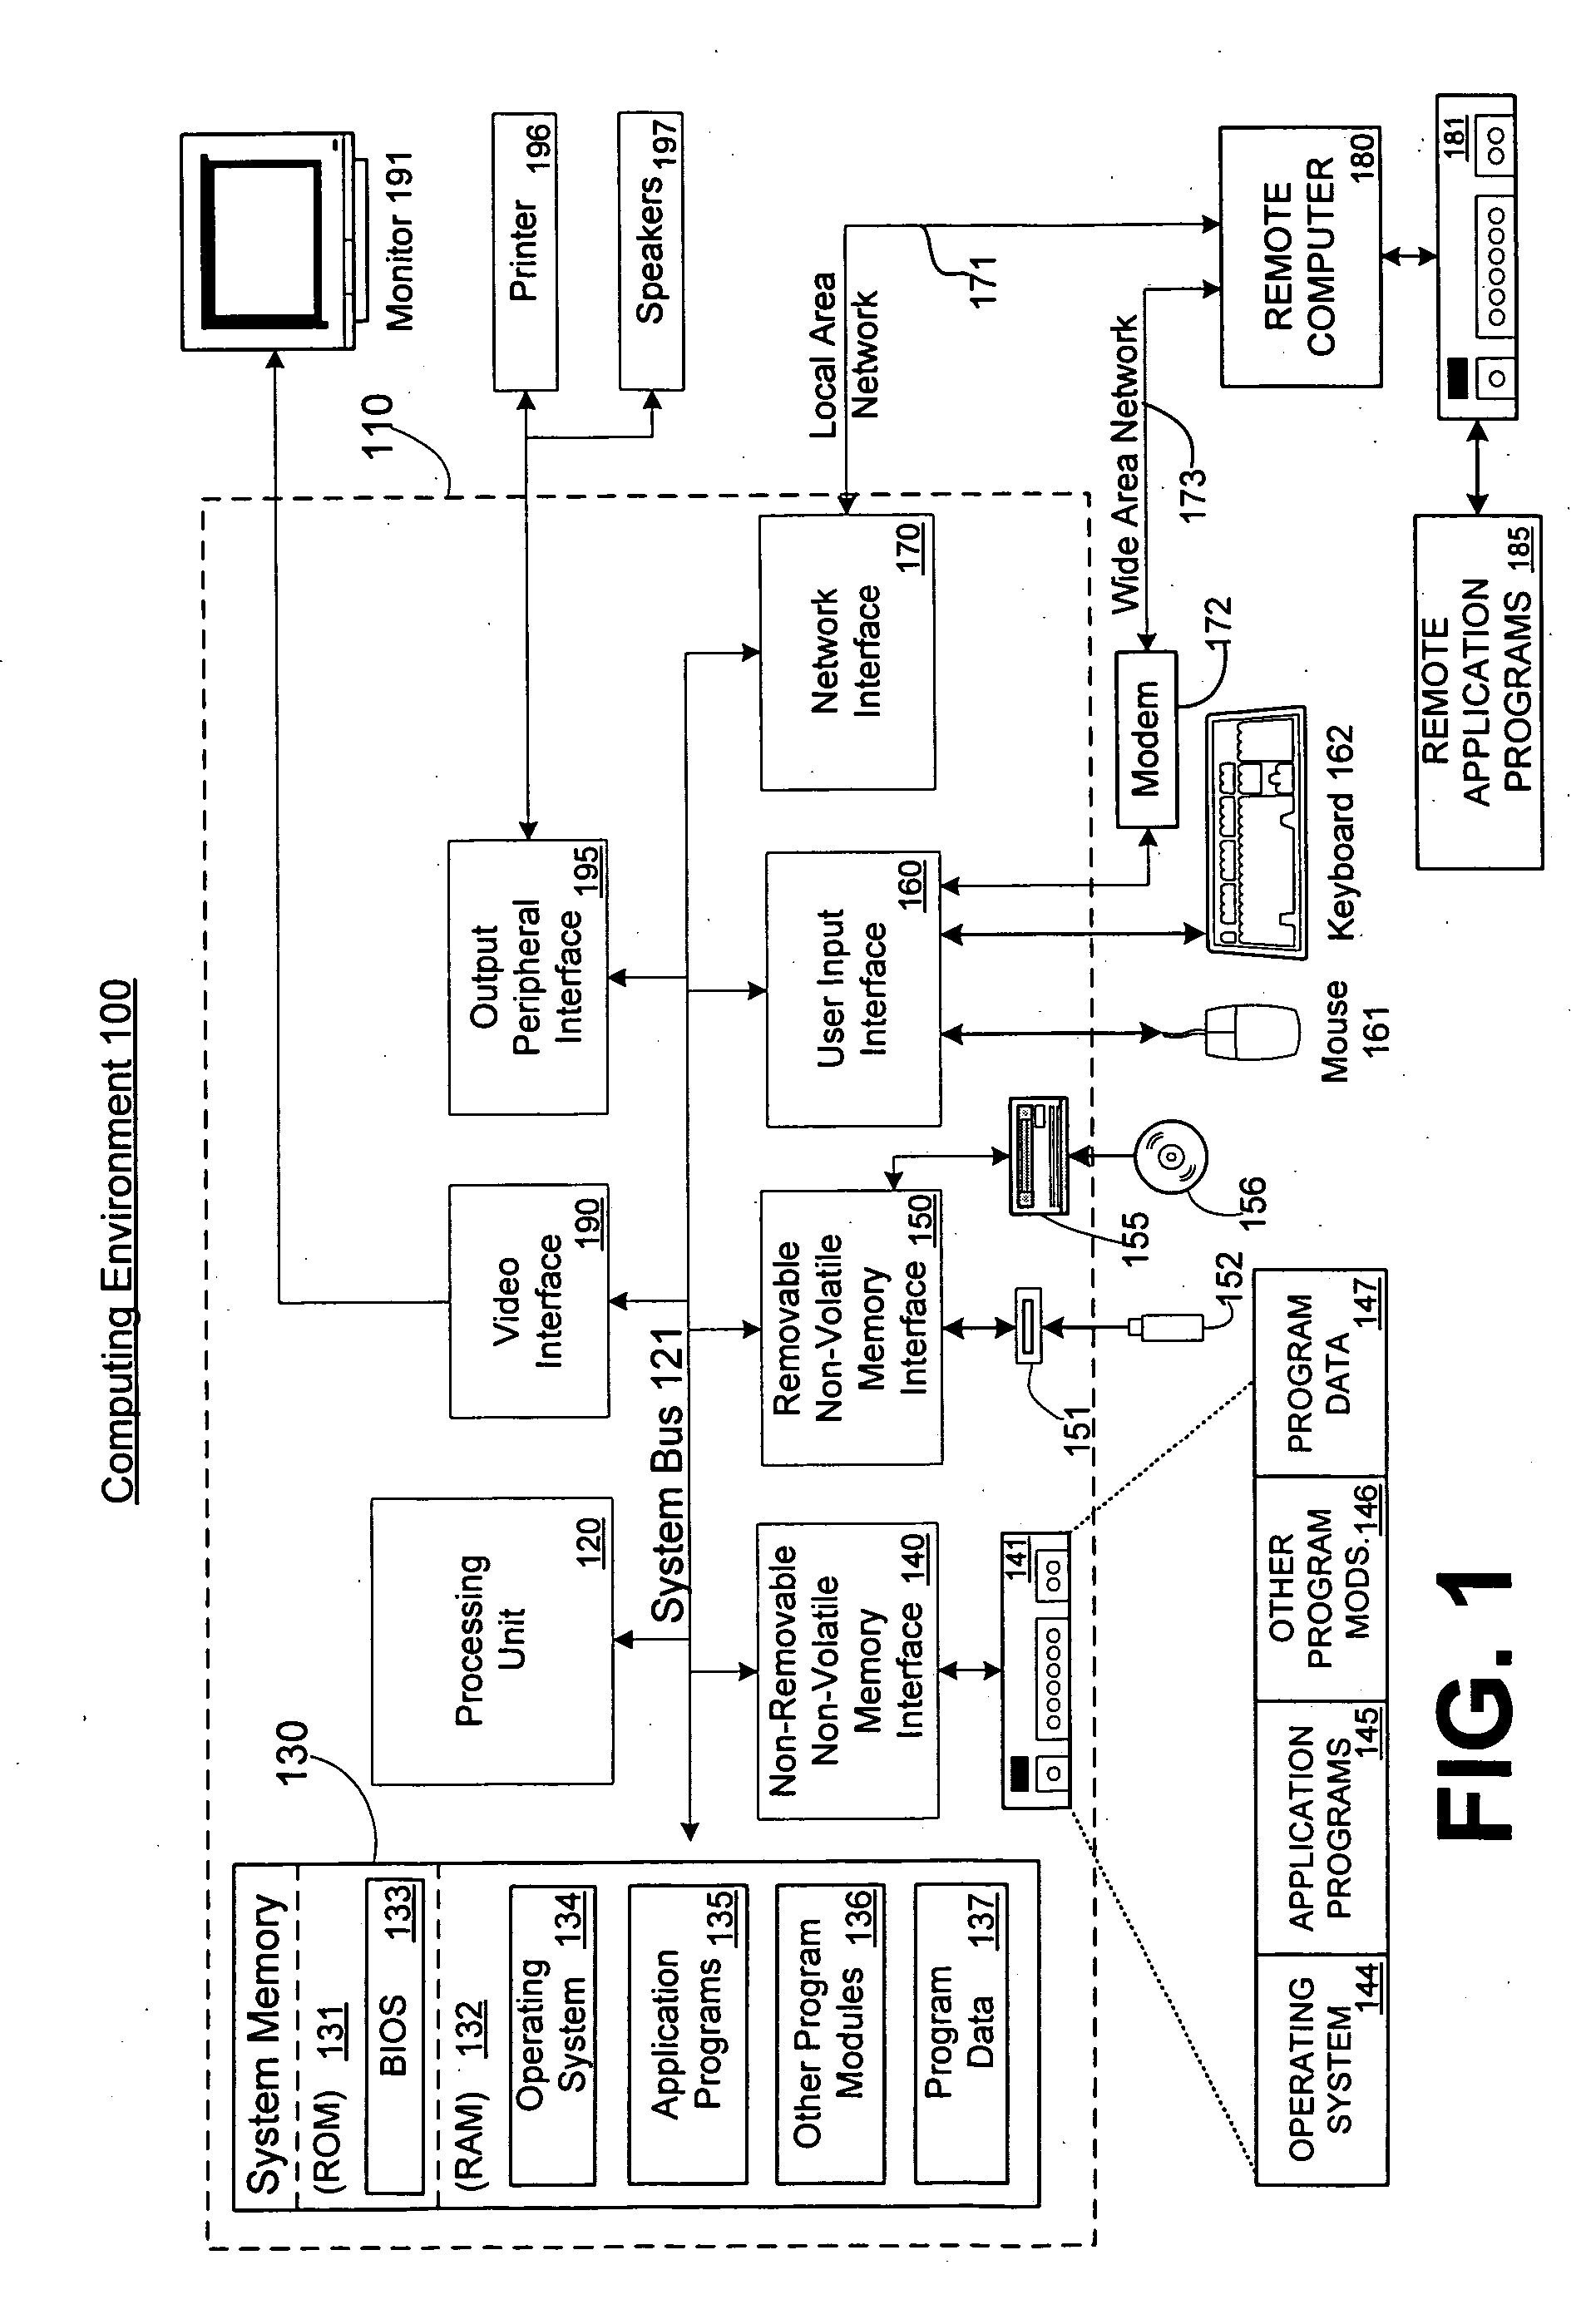 System and methods for an overlay disk and cache using portable flash memory